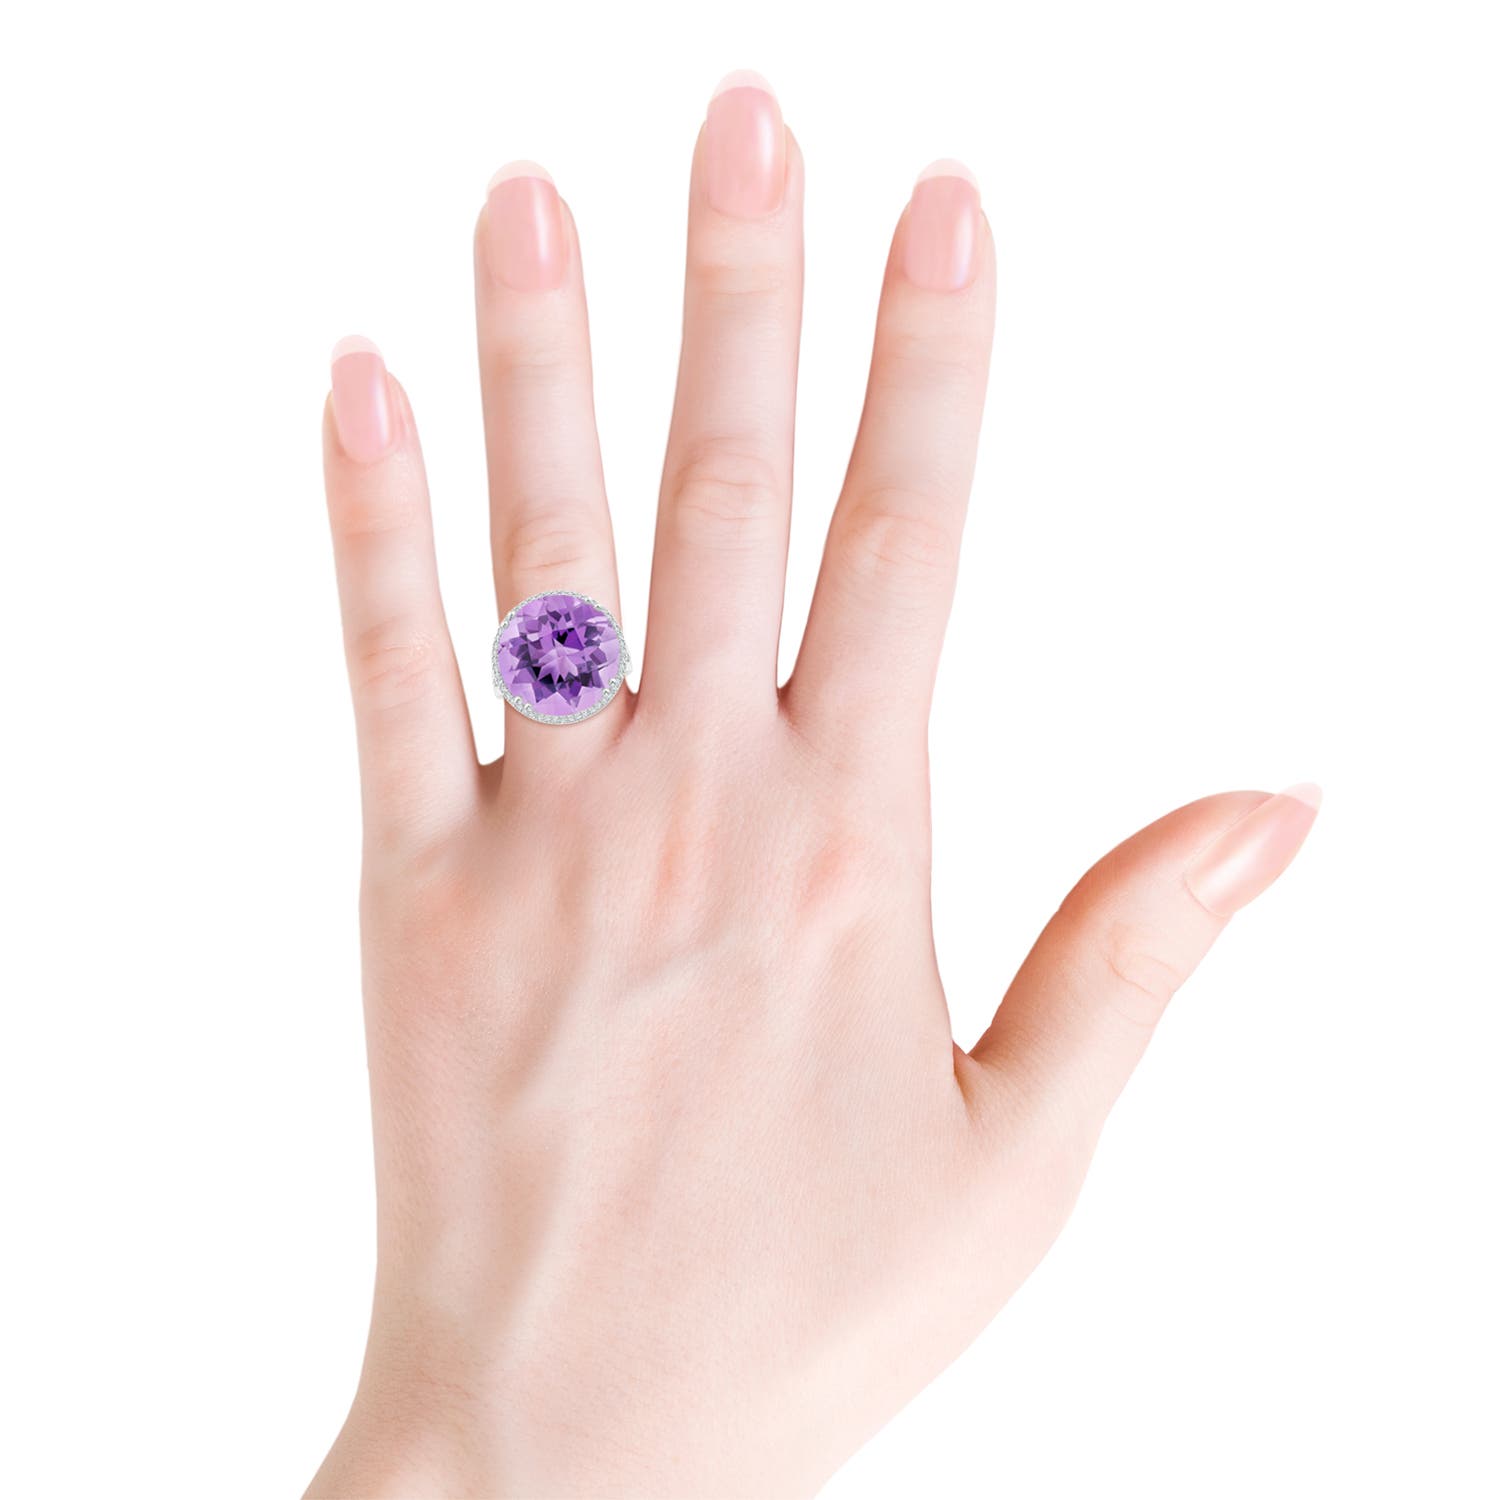 A - Amethyst / 15.18 CT / 14 KT White Gold